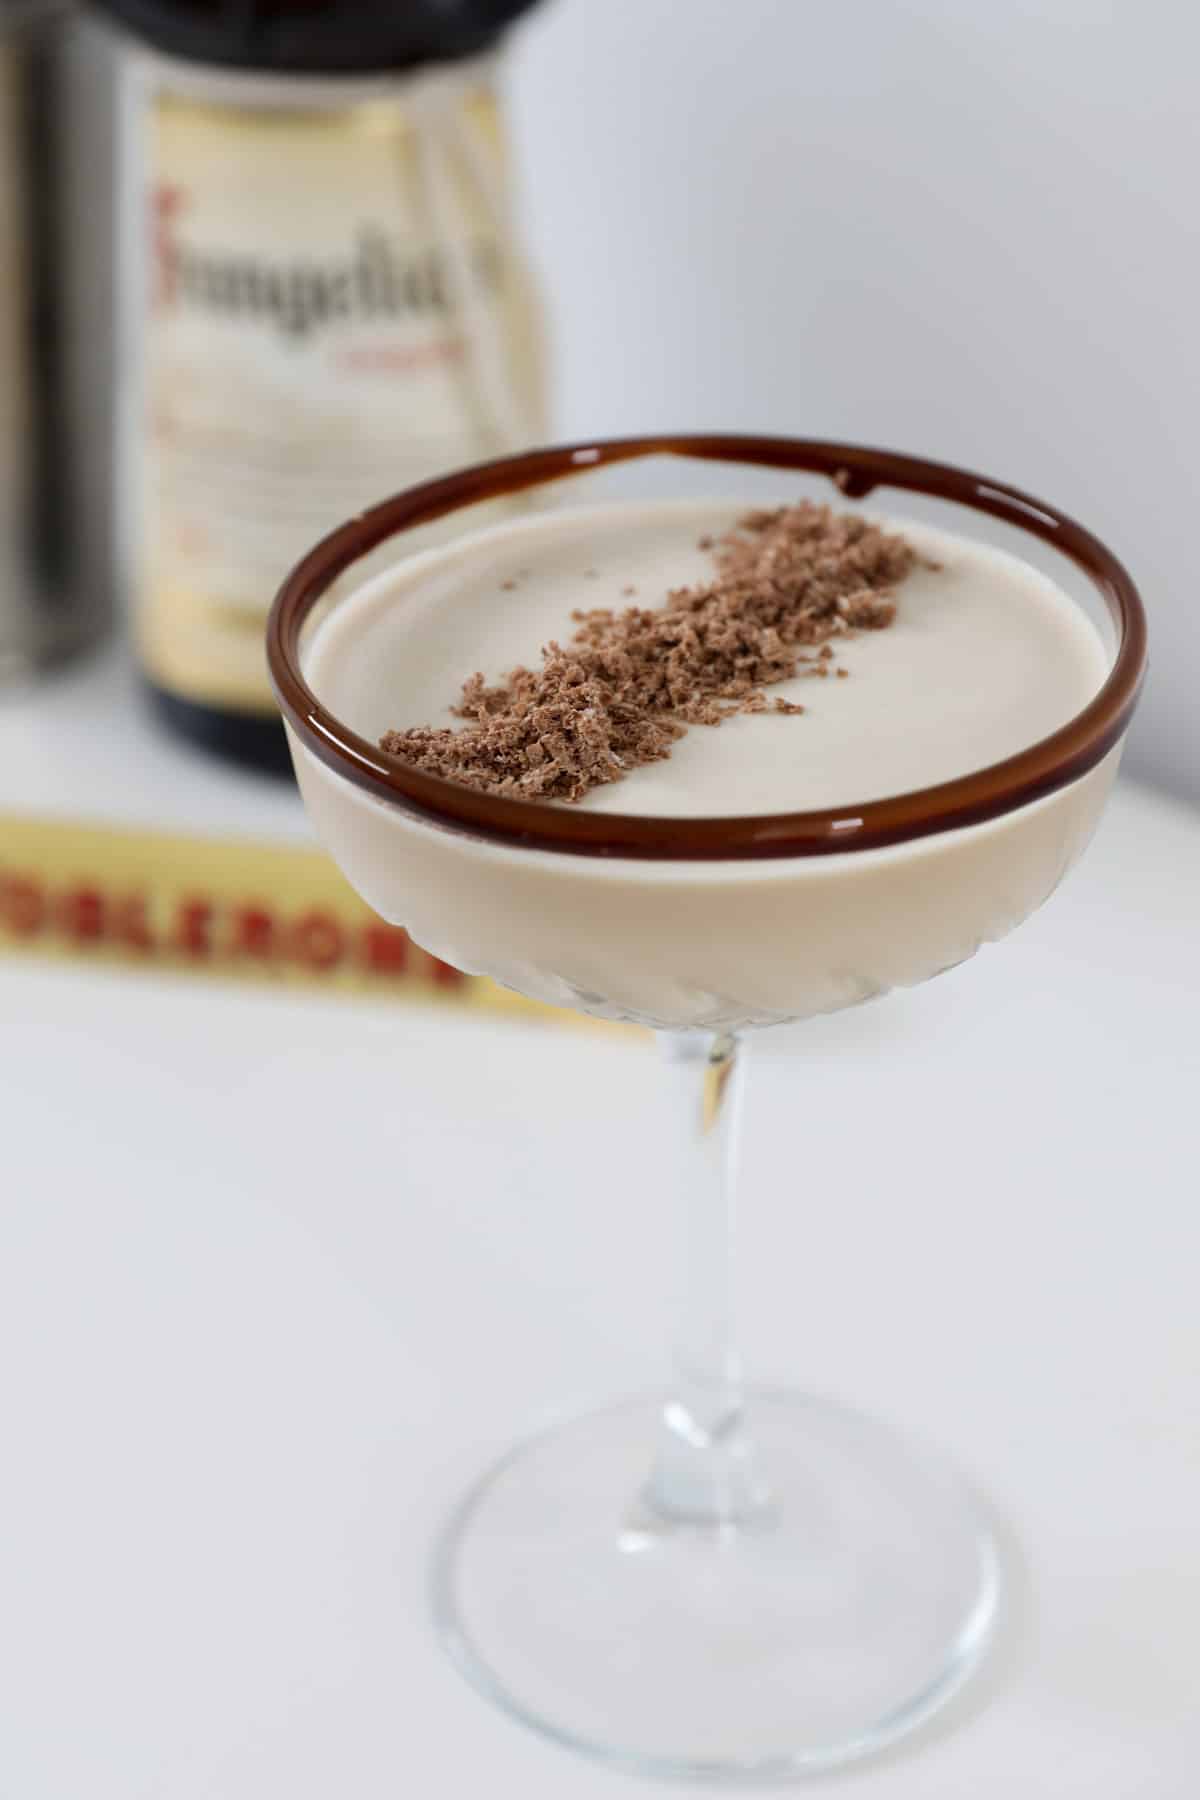 A close up of a chocolate rimmed glass filled with a creamy cocktail.